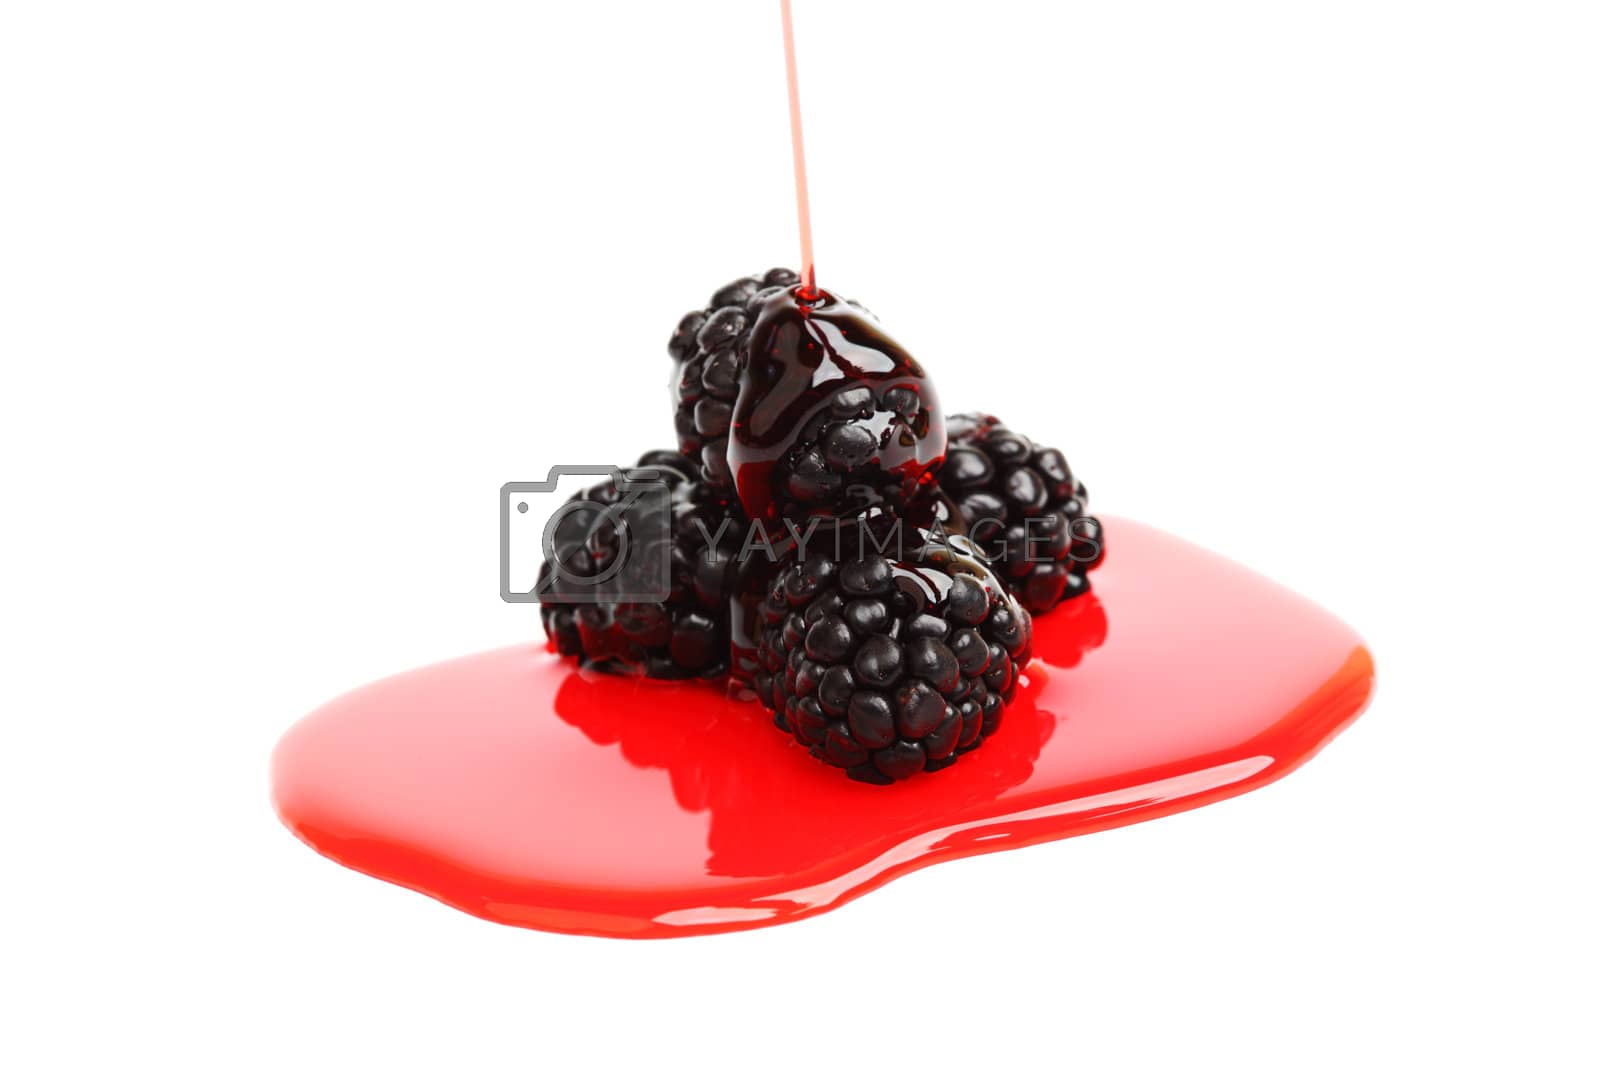 Royalty free image of blackberry pile in syrup by Yellowj